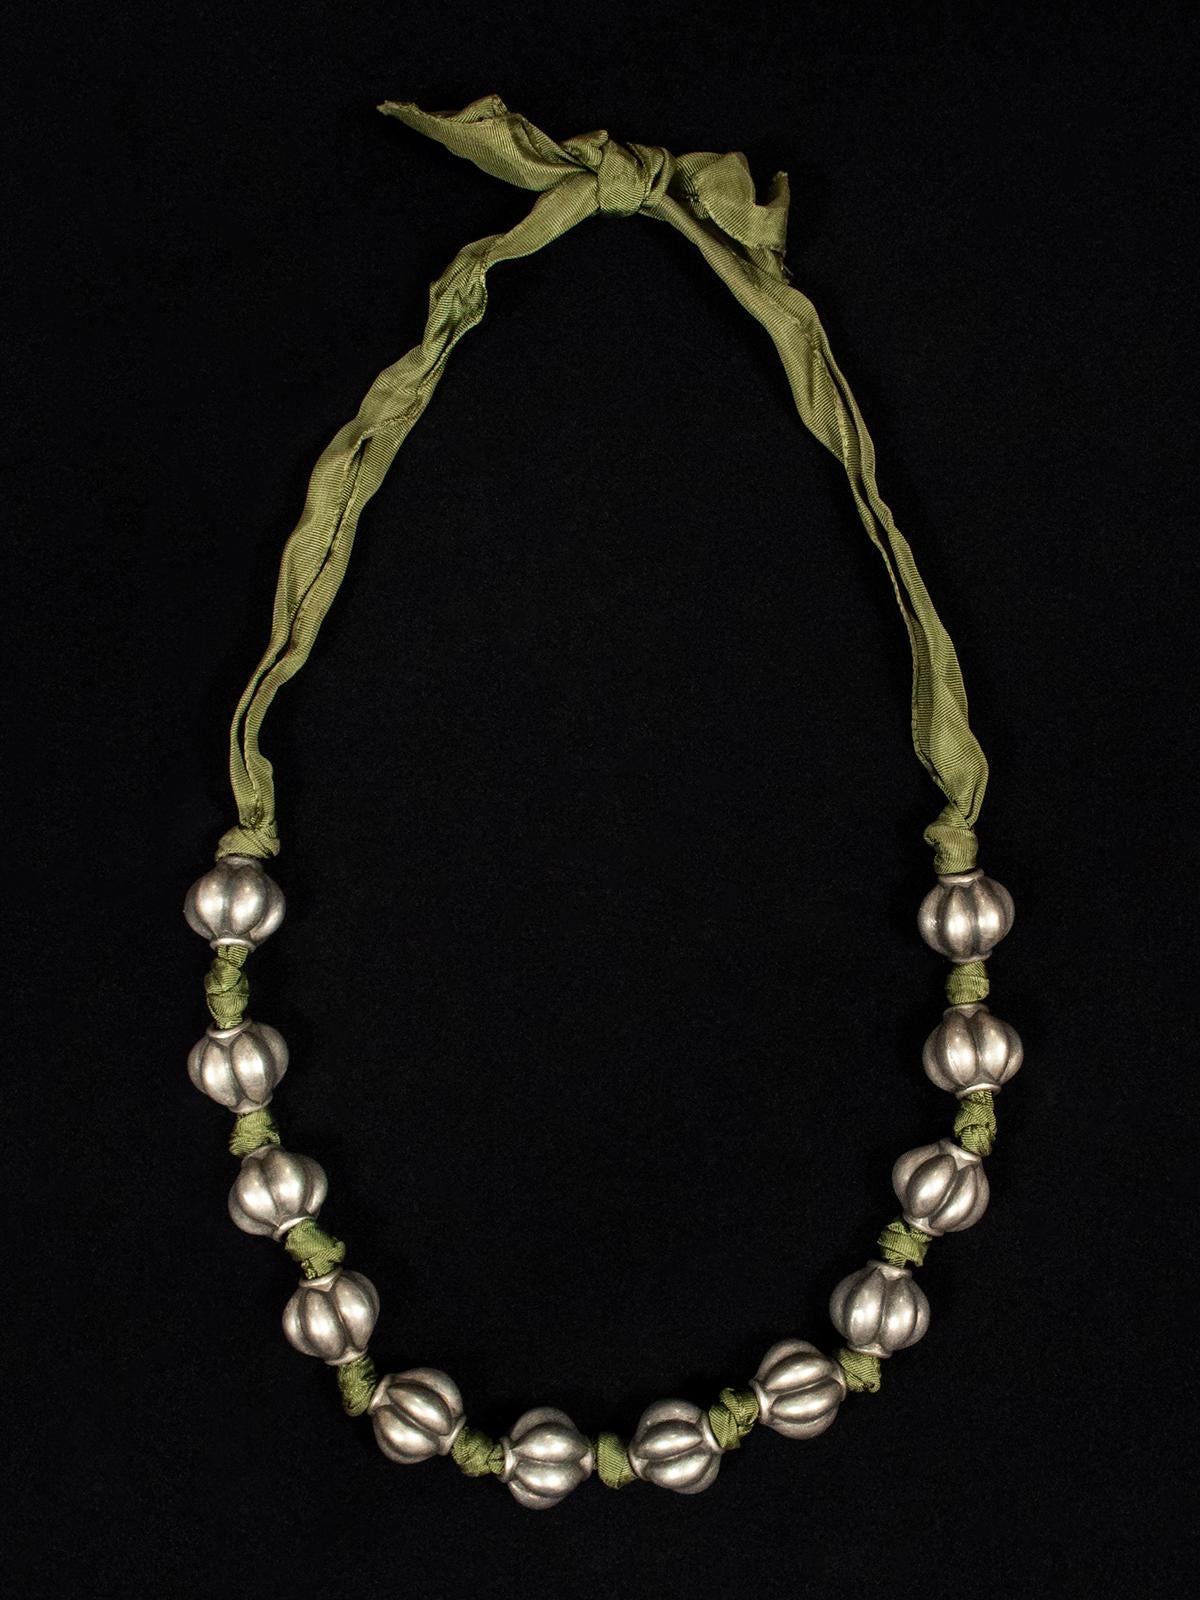 20th Century antique silver melon bead and green ribbon necklace

A handsome necklace of old Asian silver melon beads strung on a length of green silk grosgrain ribbon. Simple, eye-catching and light weight; 31 inches (79 cm) interior